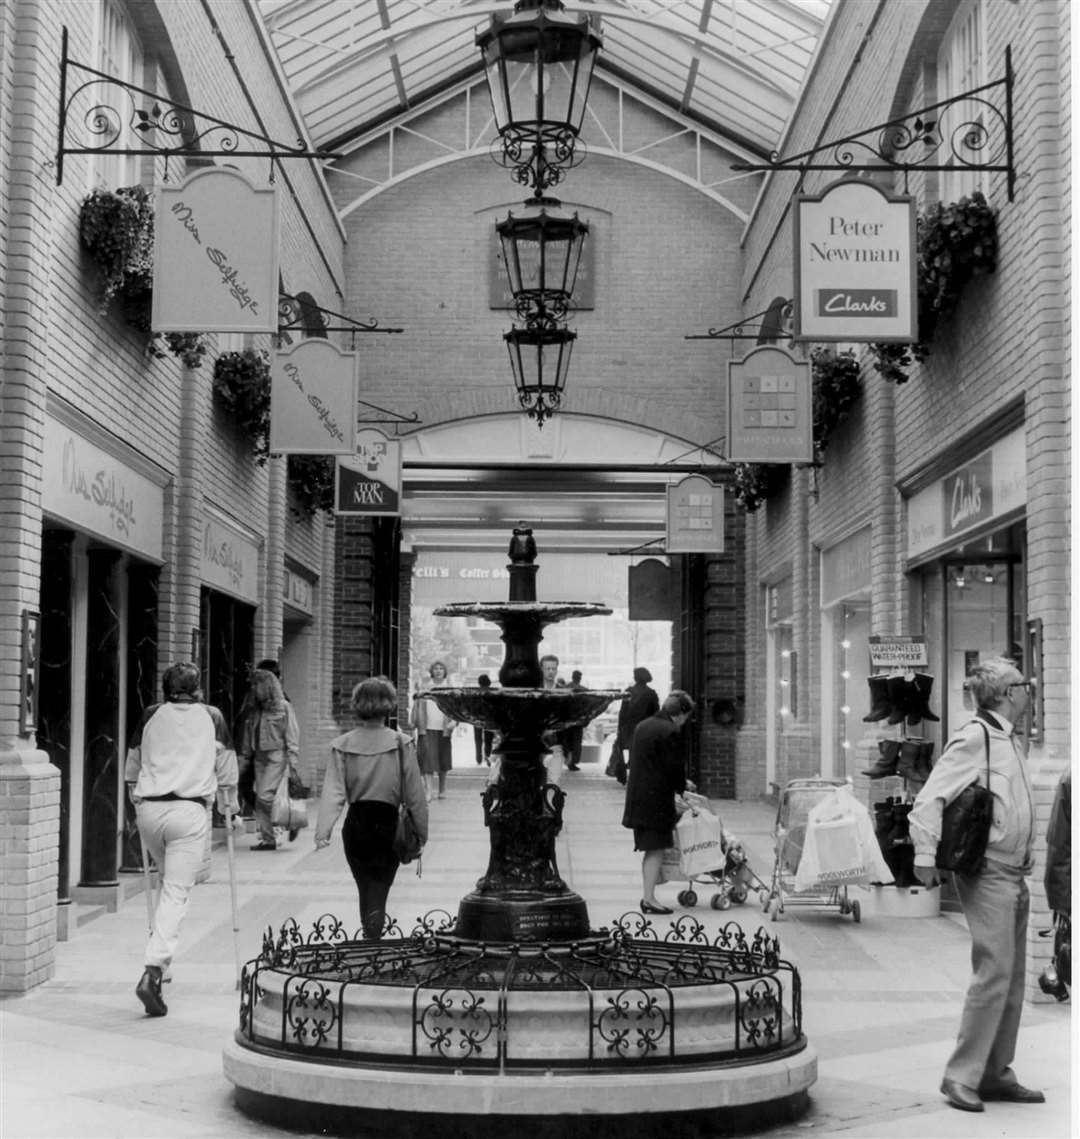 Marlowe Arcade Canterbury 1990 - the arcade still exists and is home to Copperfield and HMV